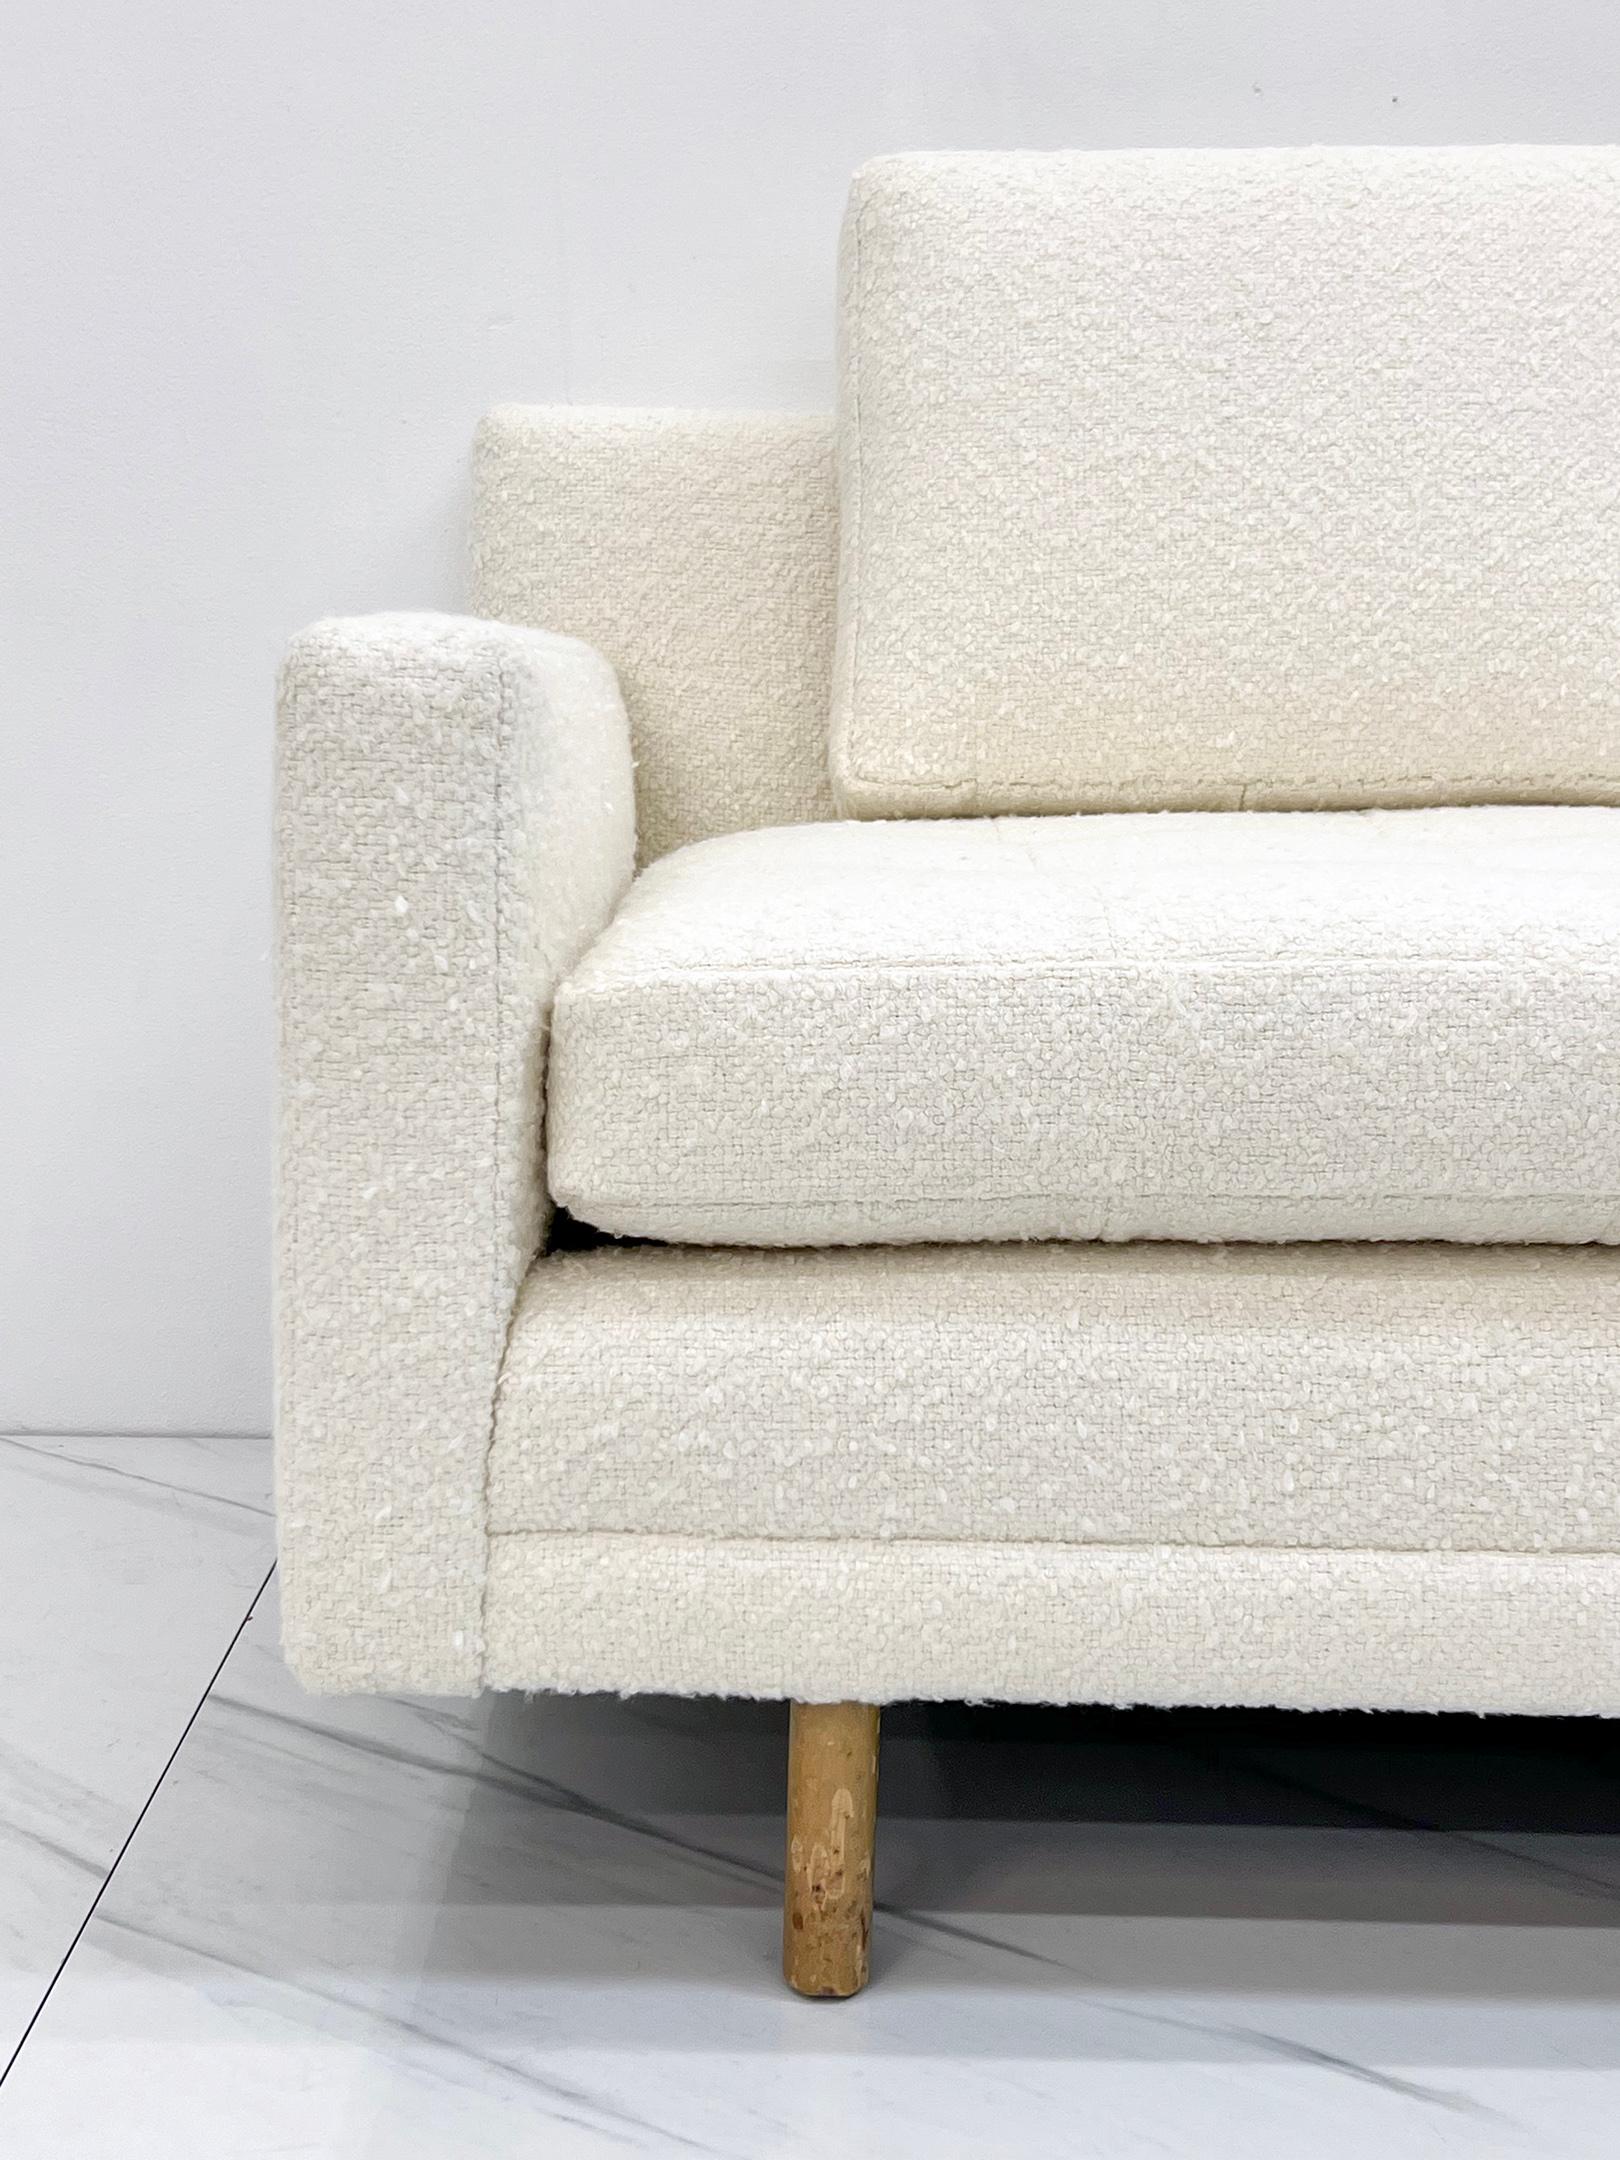 Paul McCobb Tuxedo Sofa in White Boucle, Directional, 1960's In Good Condition For Sale In Culver City, CA